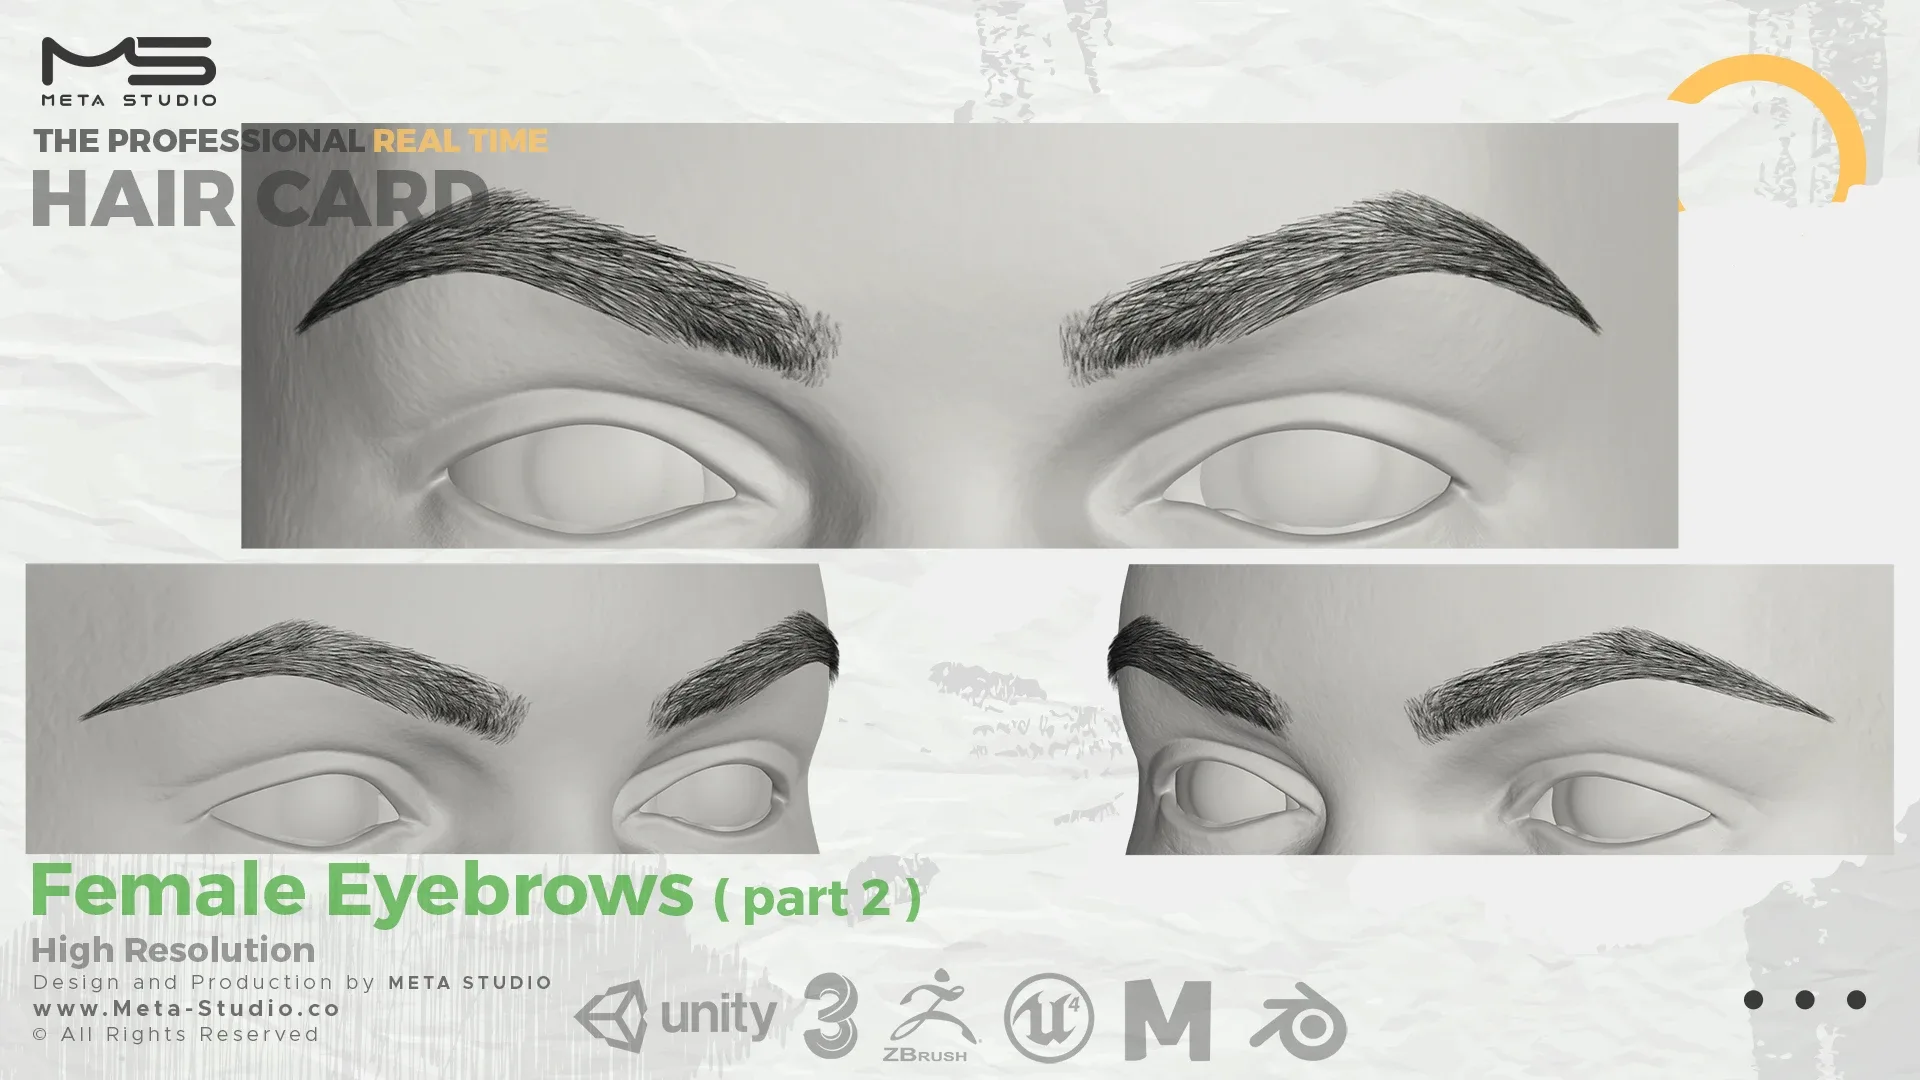 Female Eyebrows Part 2 - Professional Realtime Hair card